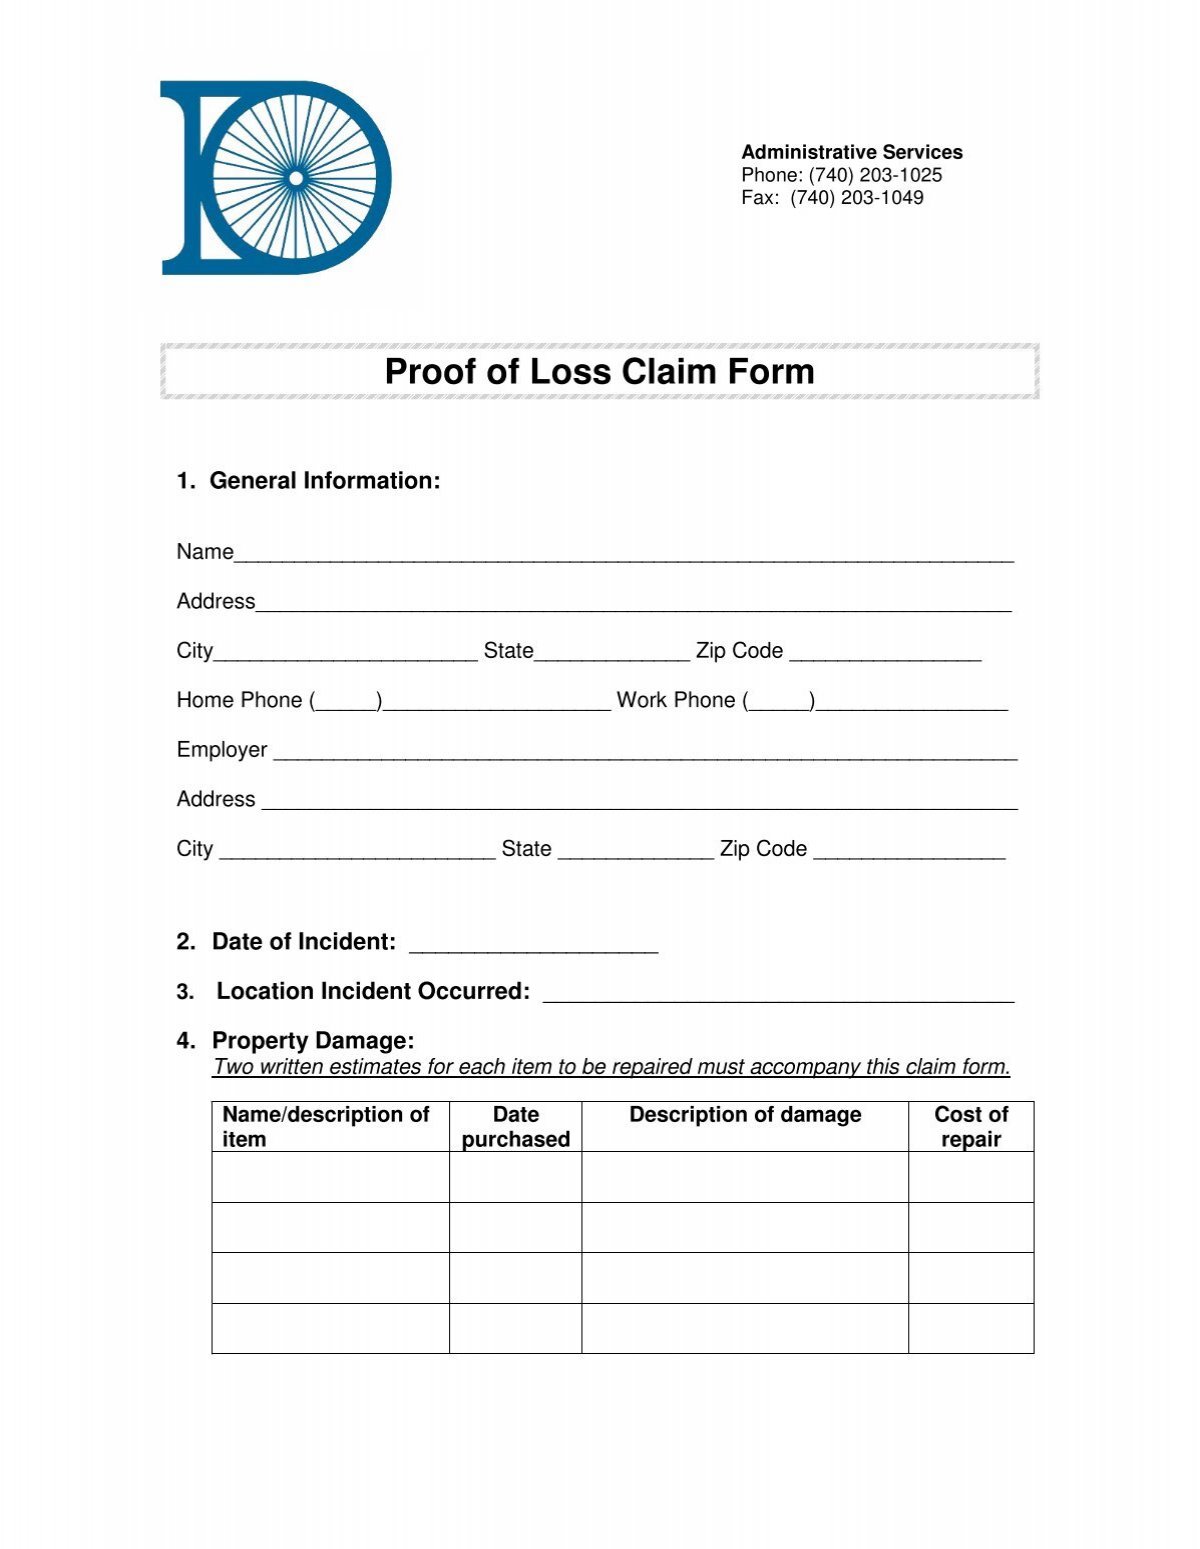 proof-of-loss-claim-form-pdf-city-of-delaware